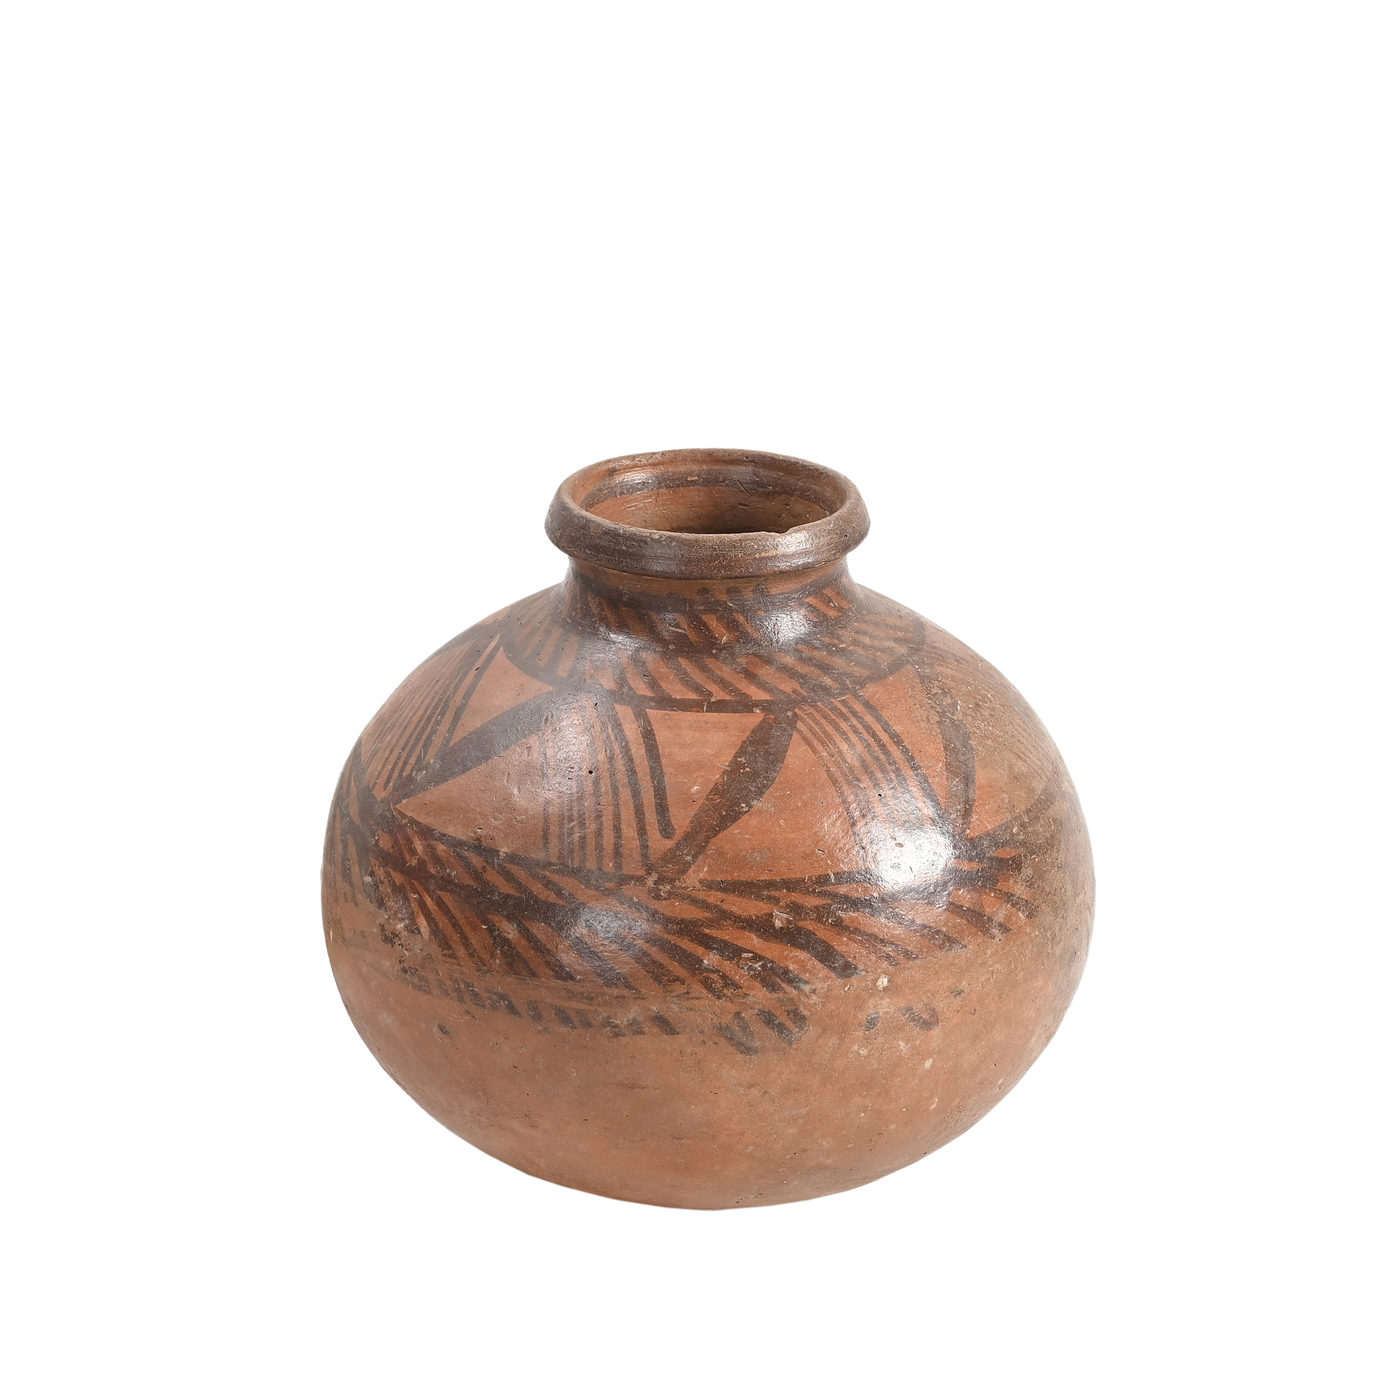 Gaon - Poterie traditionnelle n°27